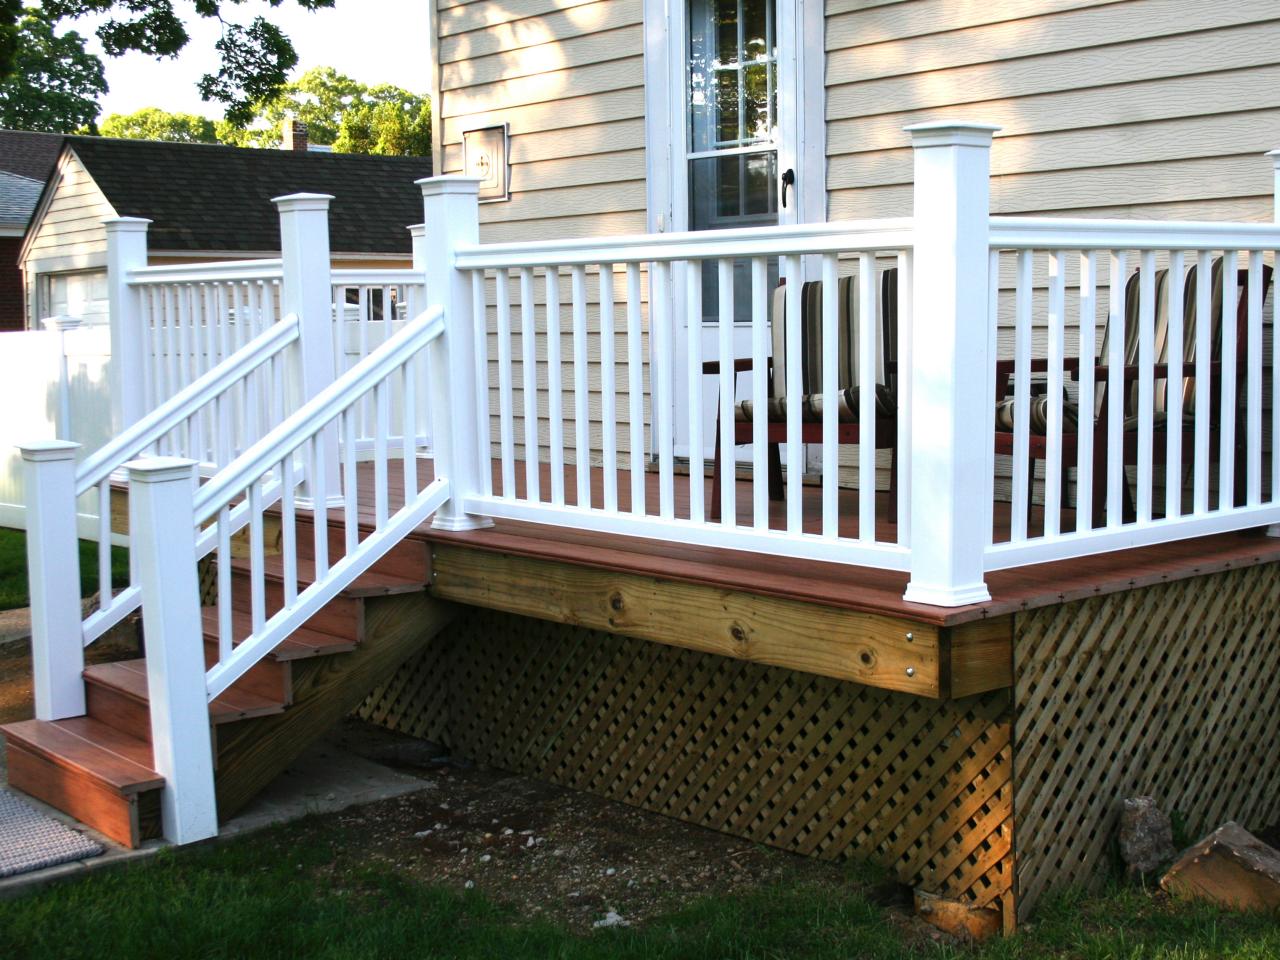 How can you build a simple wooden patio deck?